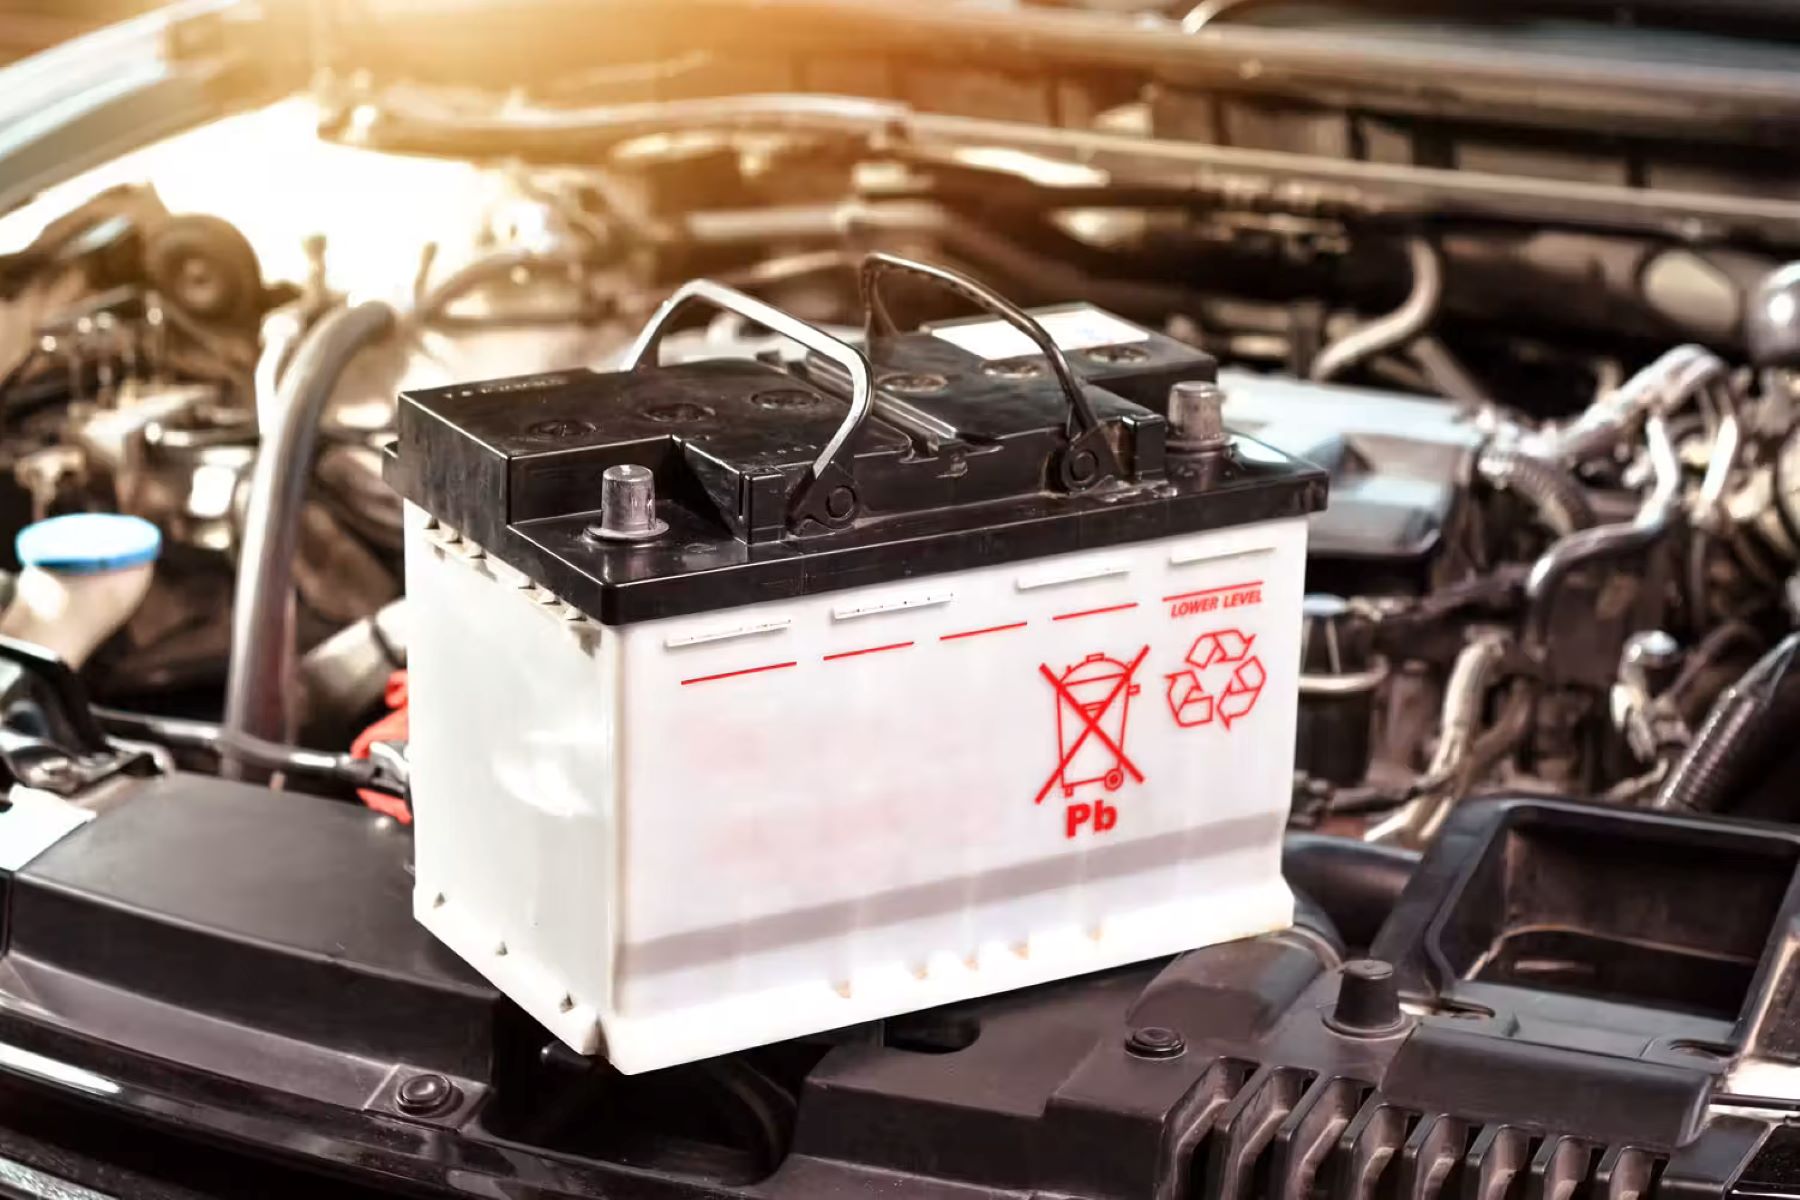 Get Cash Back For Your Old Car Battery – Return Any Battery For A Refund!